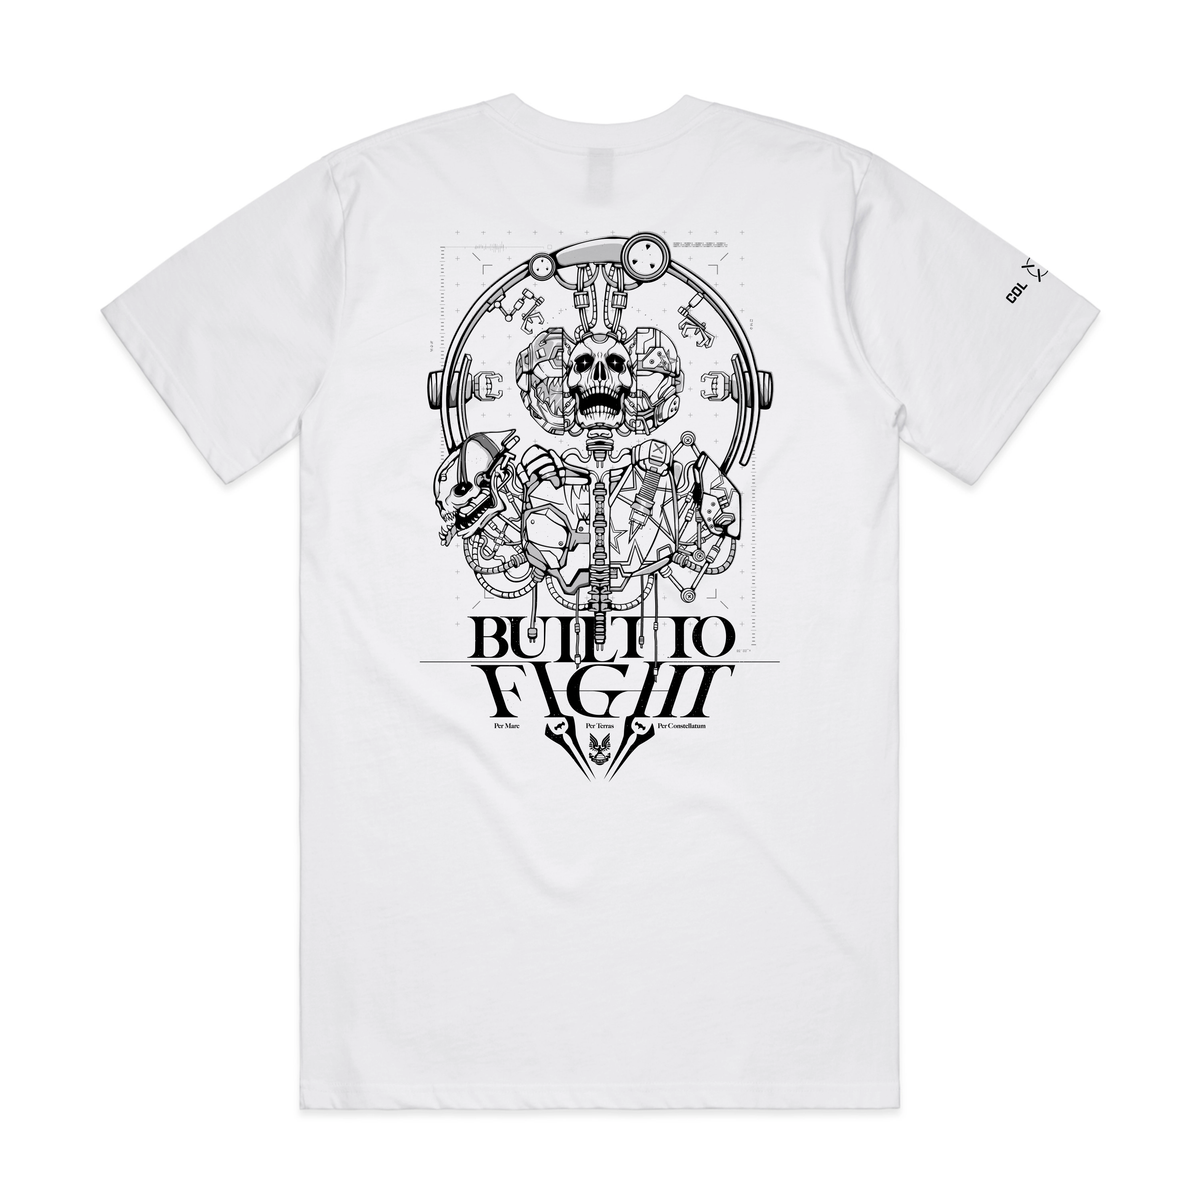 Built To Fight Tee